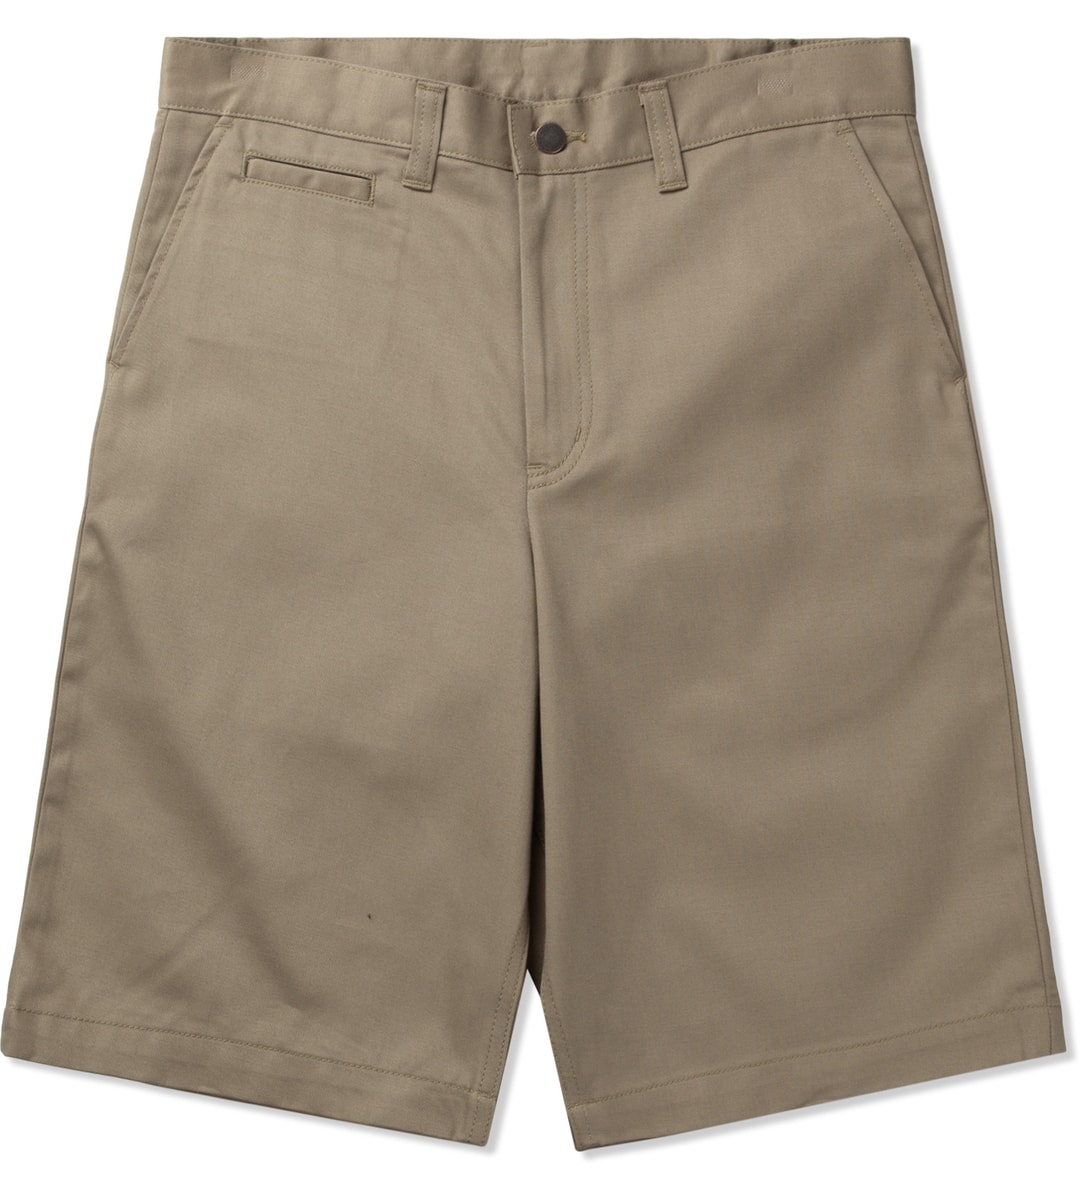 FTC - Beige Chino Shorts | HBX - Globally Curated Fashion and Lifestyle ...